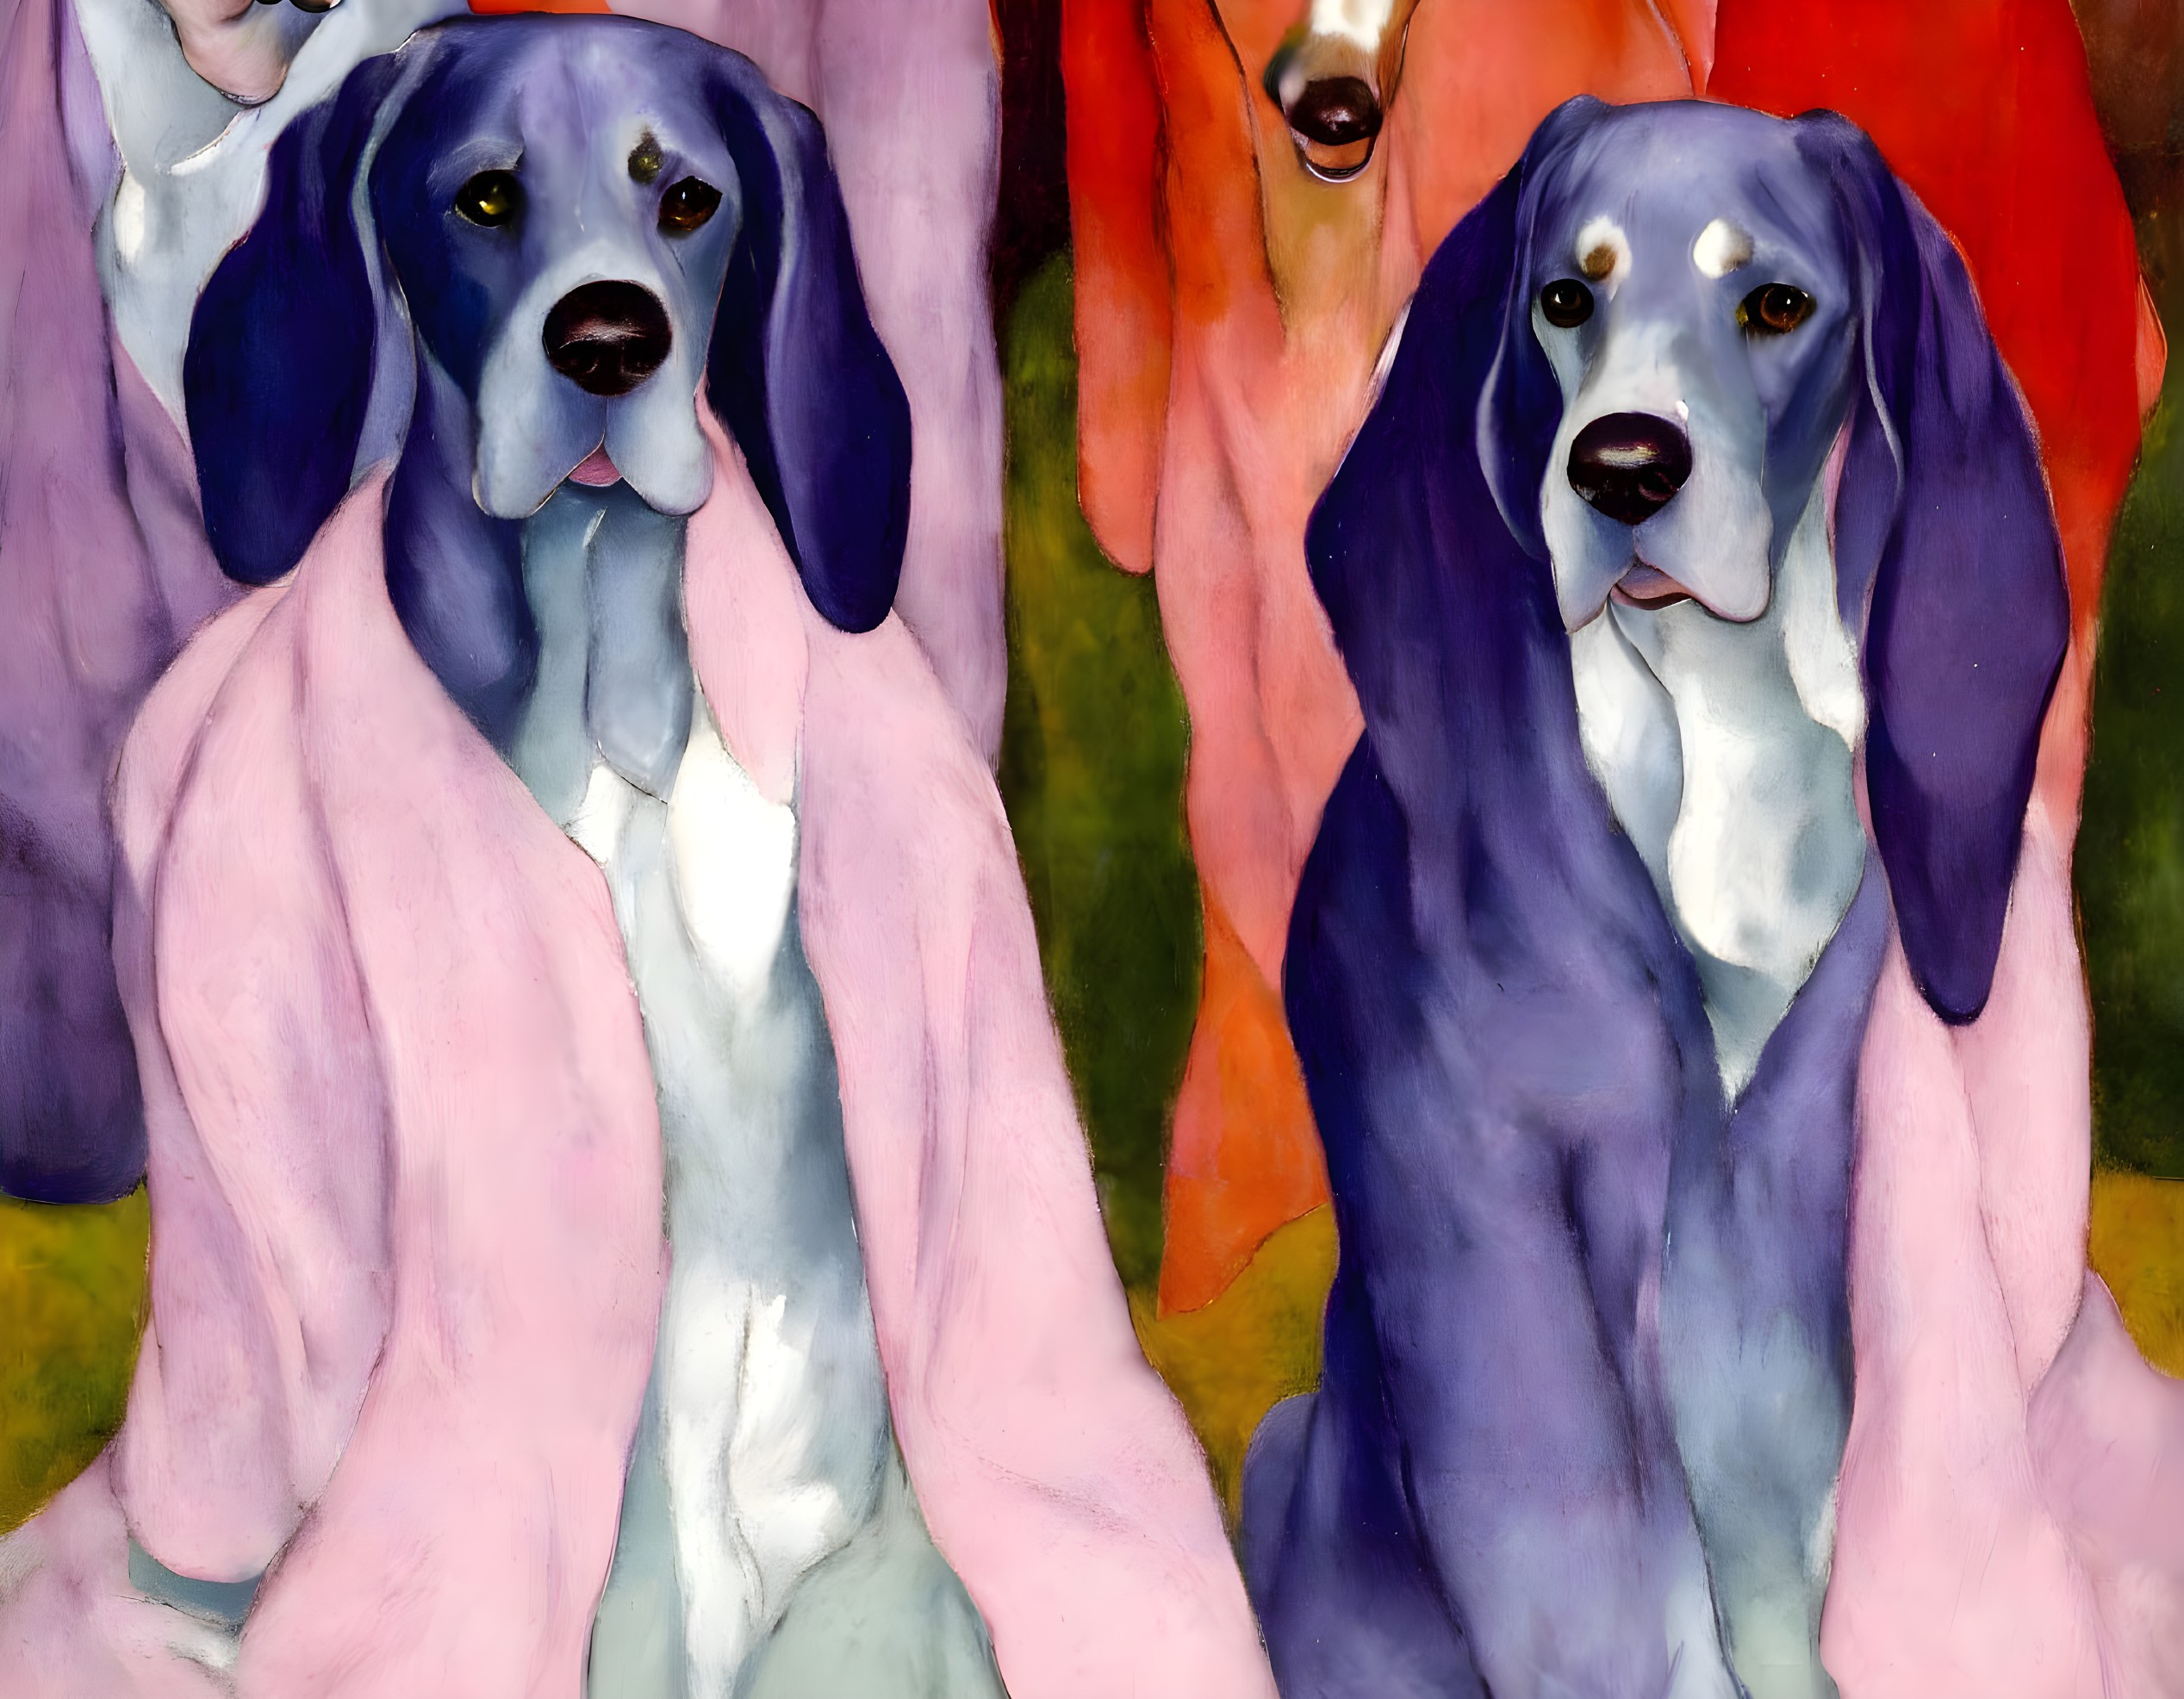 Stylized dogs in colorful robes against vibrant abstract backdrop